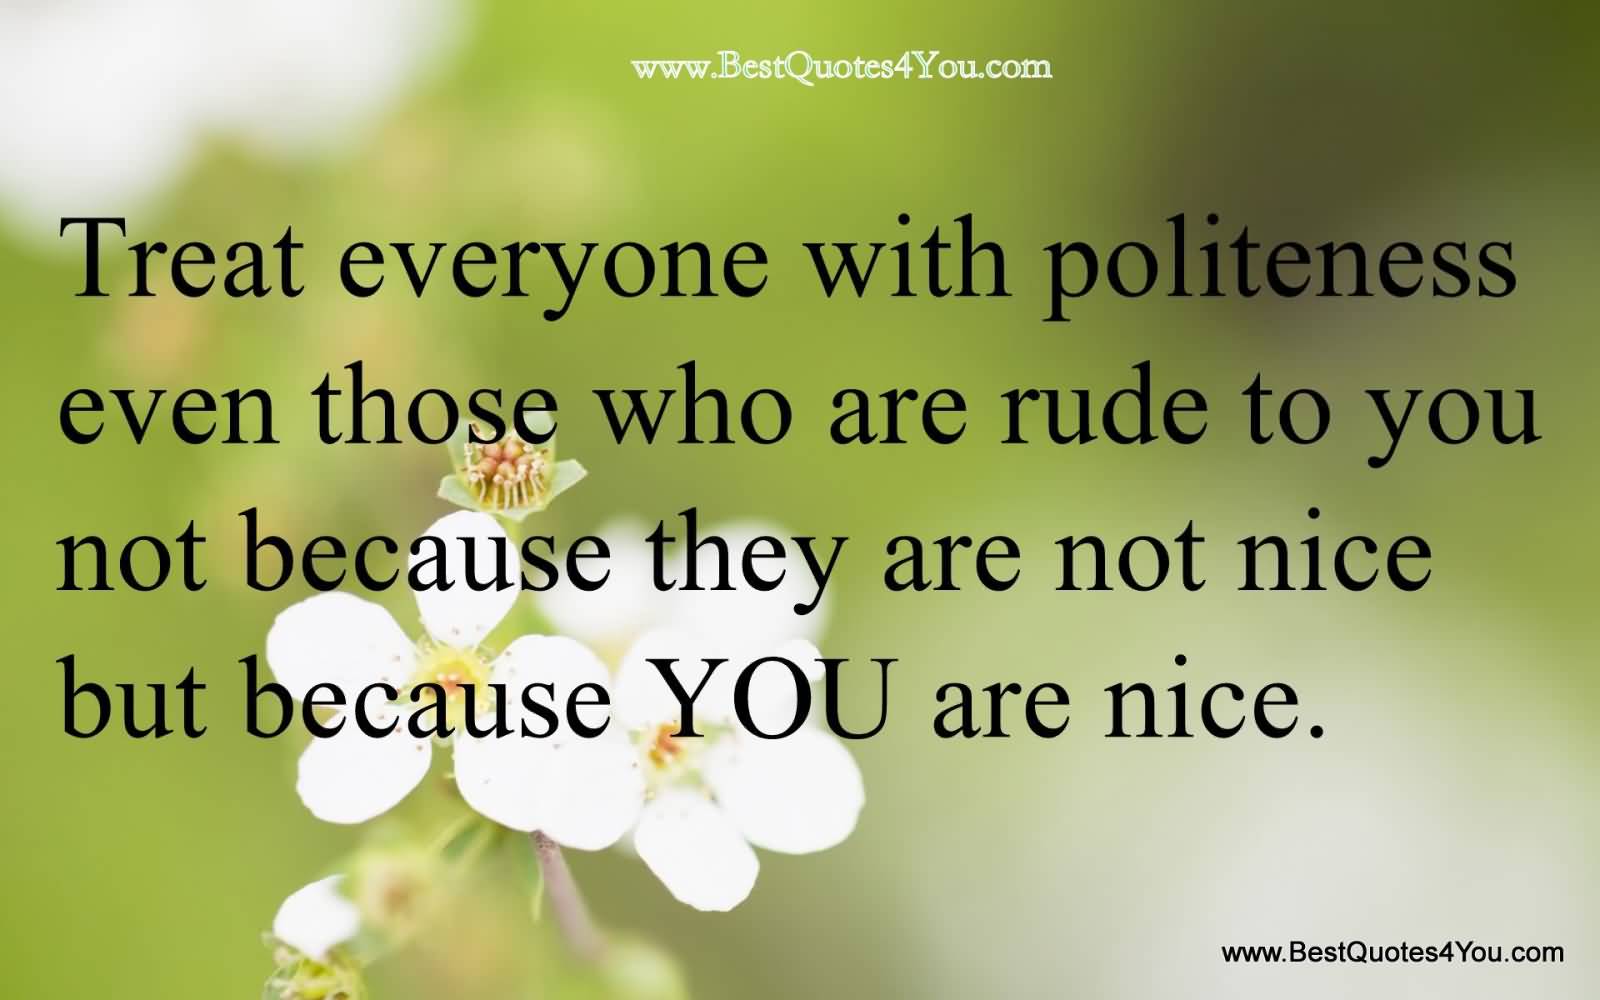 Treat everyone with politeness, even those who are rude to you – not because they are nice, but because you are nice